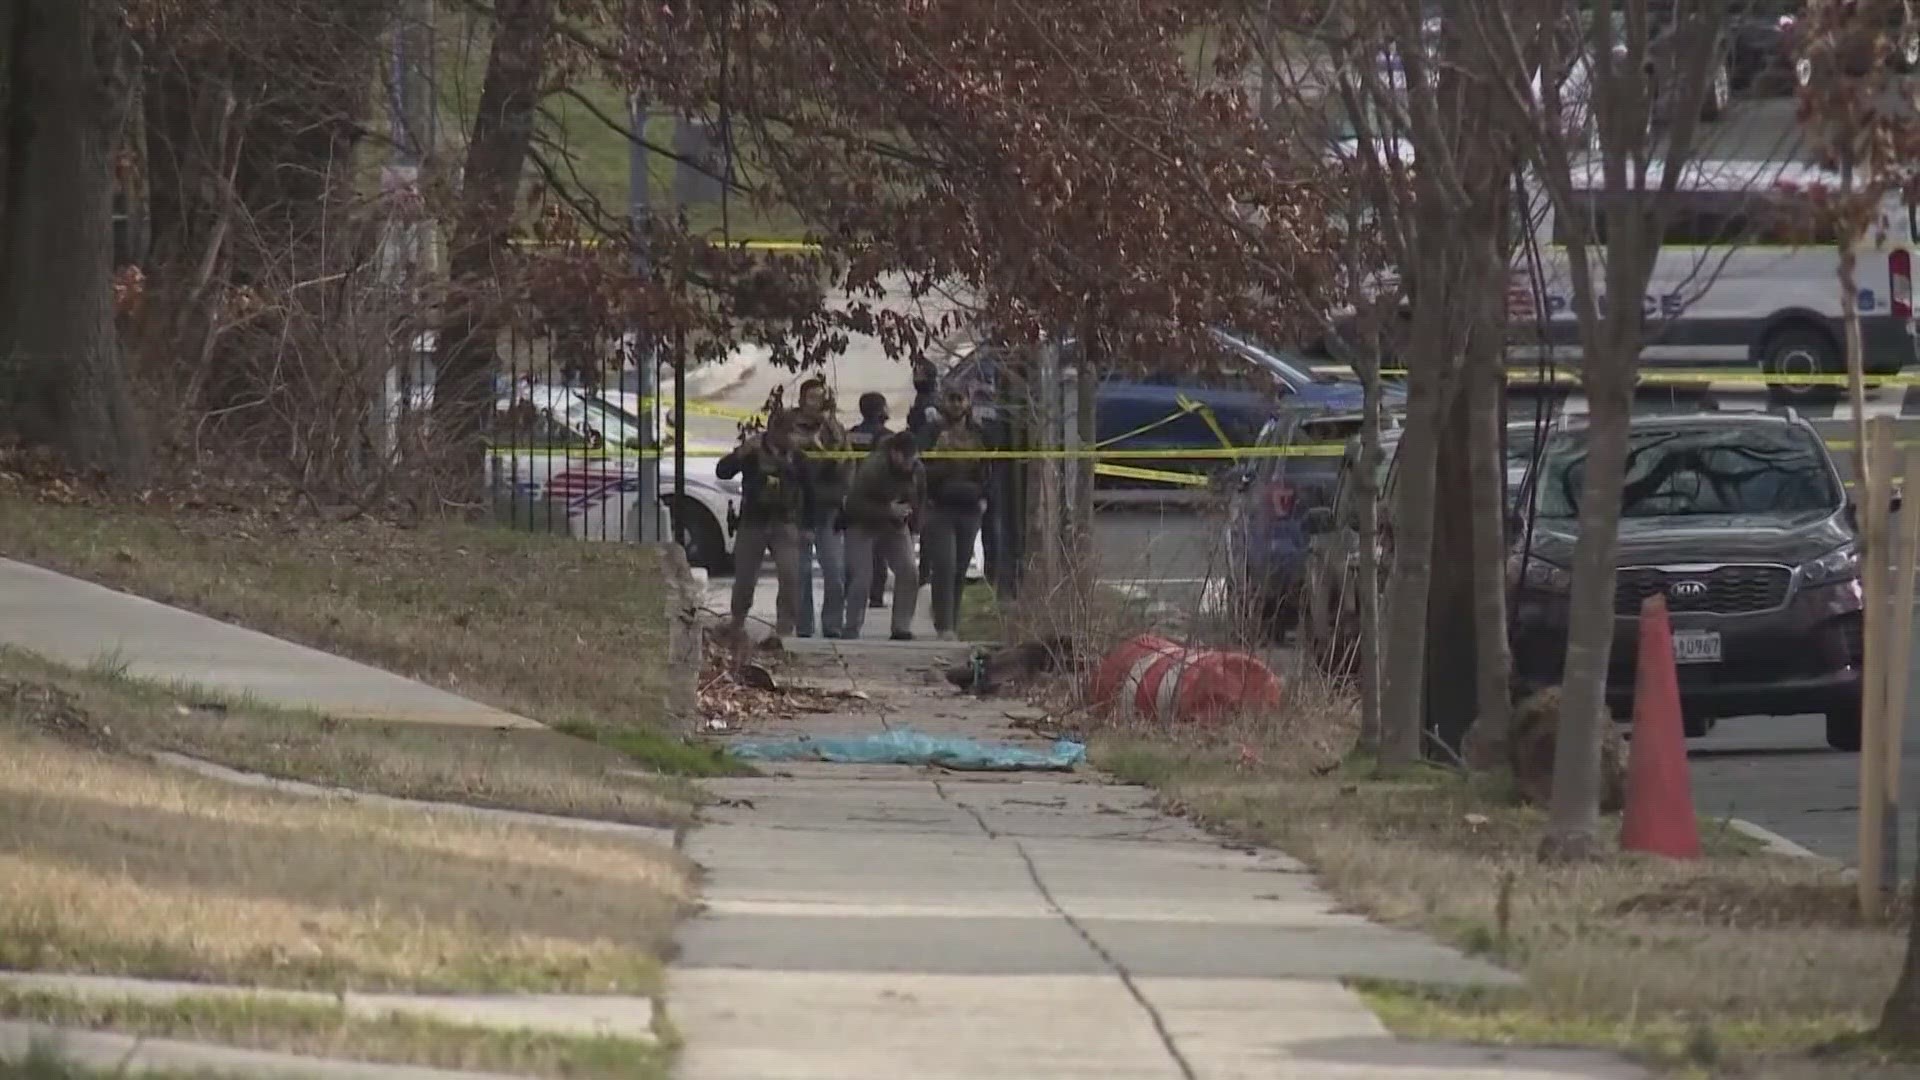 A suspect has surrendered after shooting three officers, sparking an hours-long barricade situation in Southeast D.C., police say.